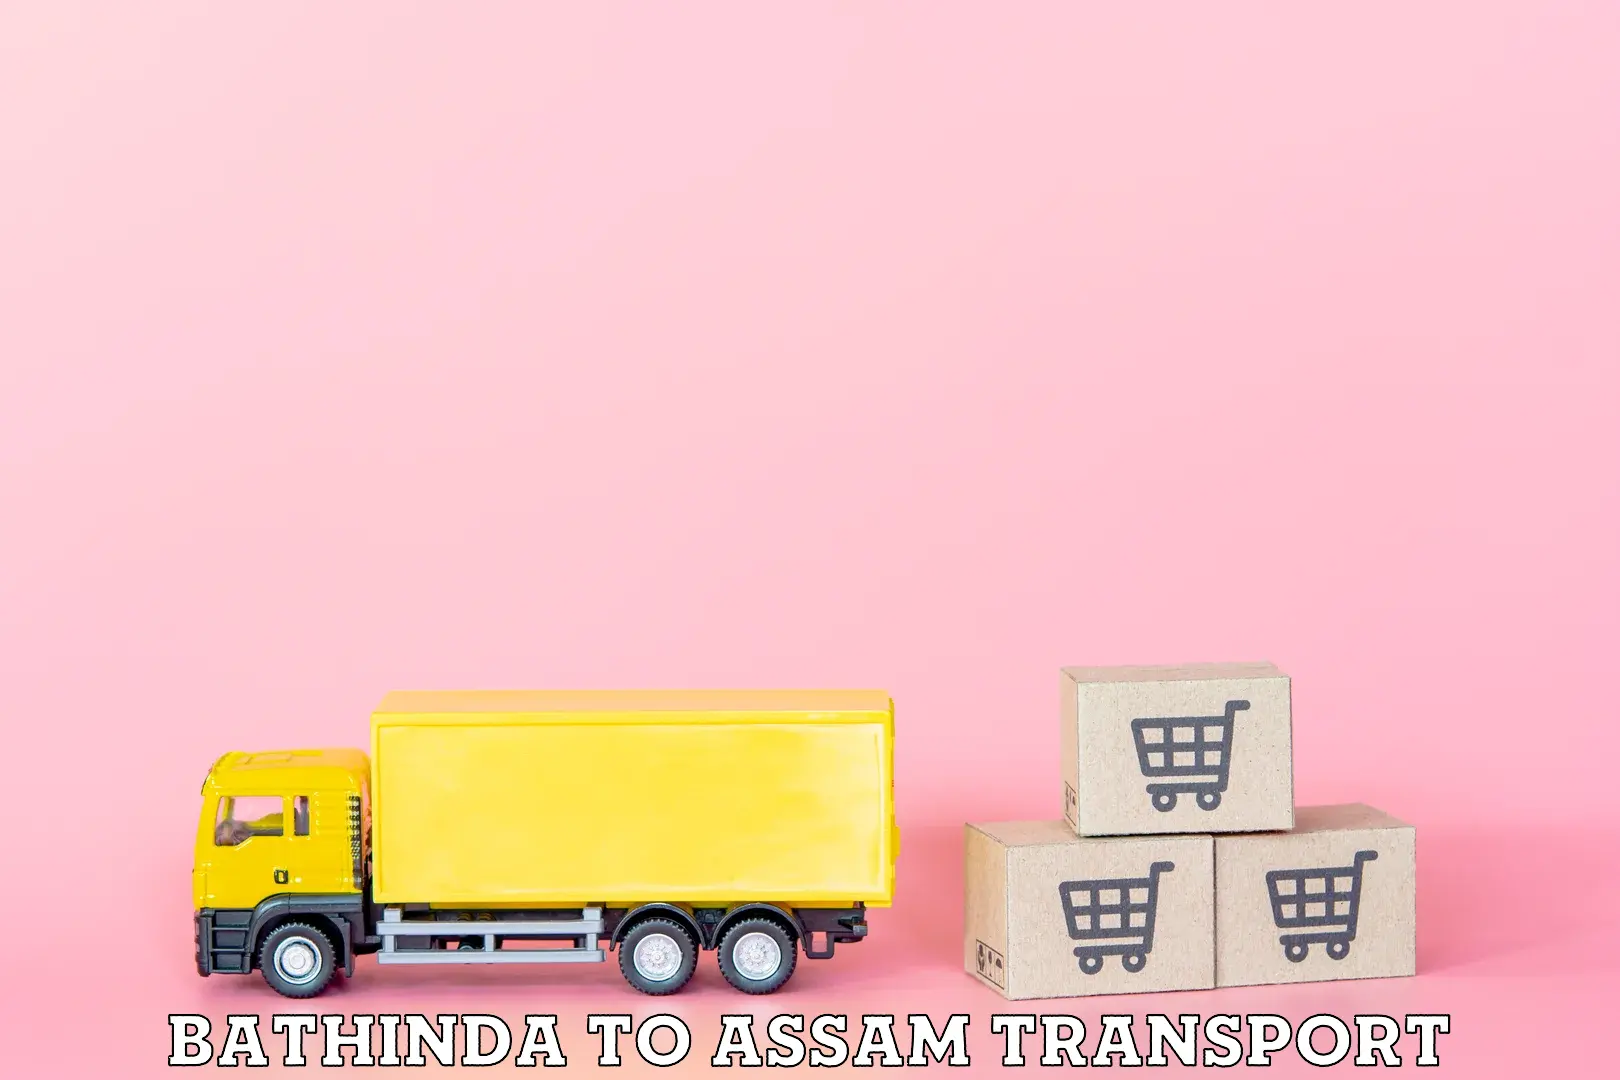 Container transport service Bathinda to Assam